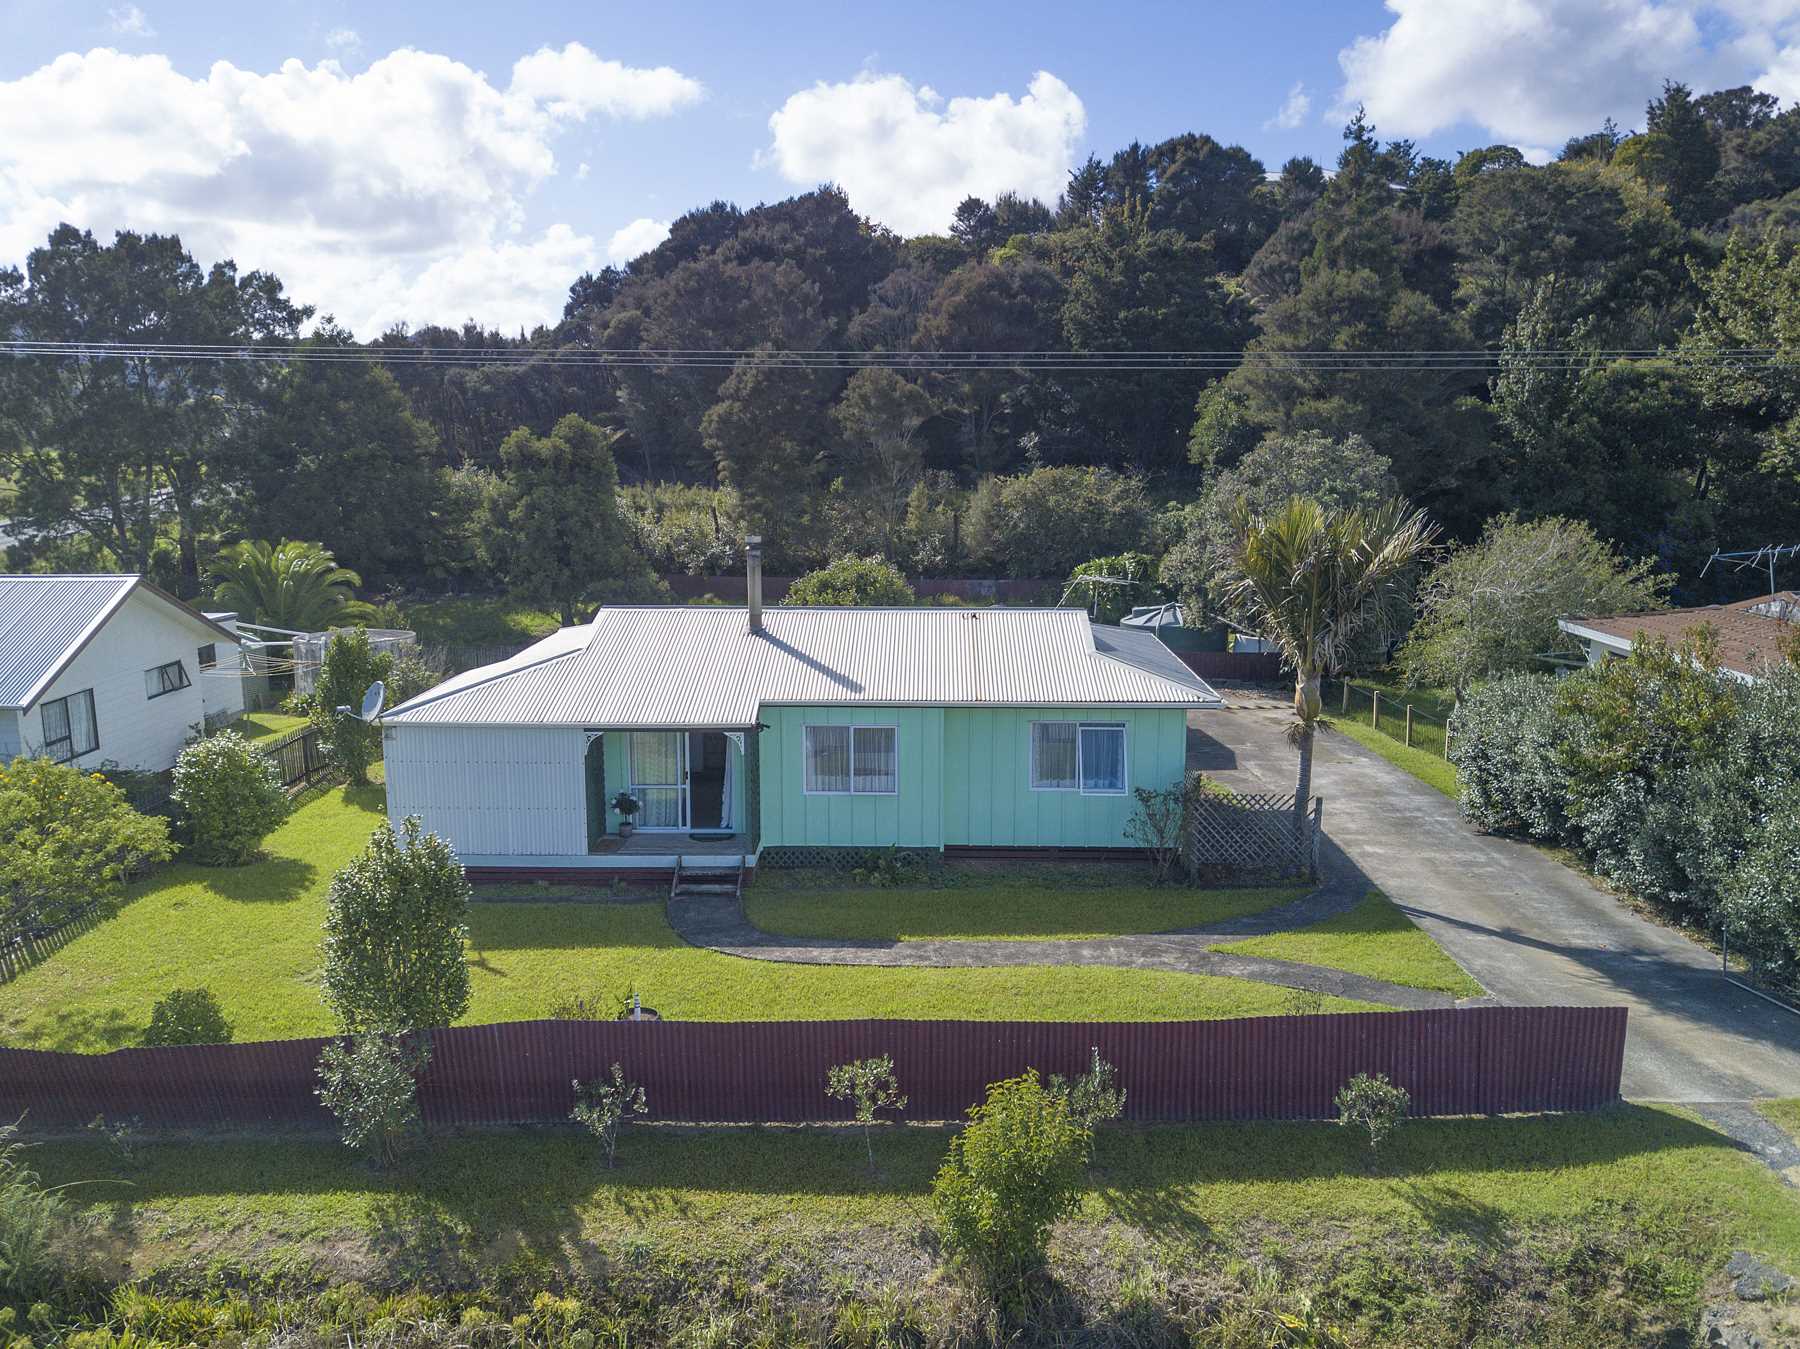 Real Estate For Sale Houses & Apartments : 3 BEDROOM RURAL VIEWS IN KAEO